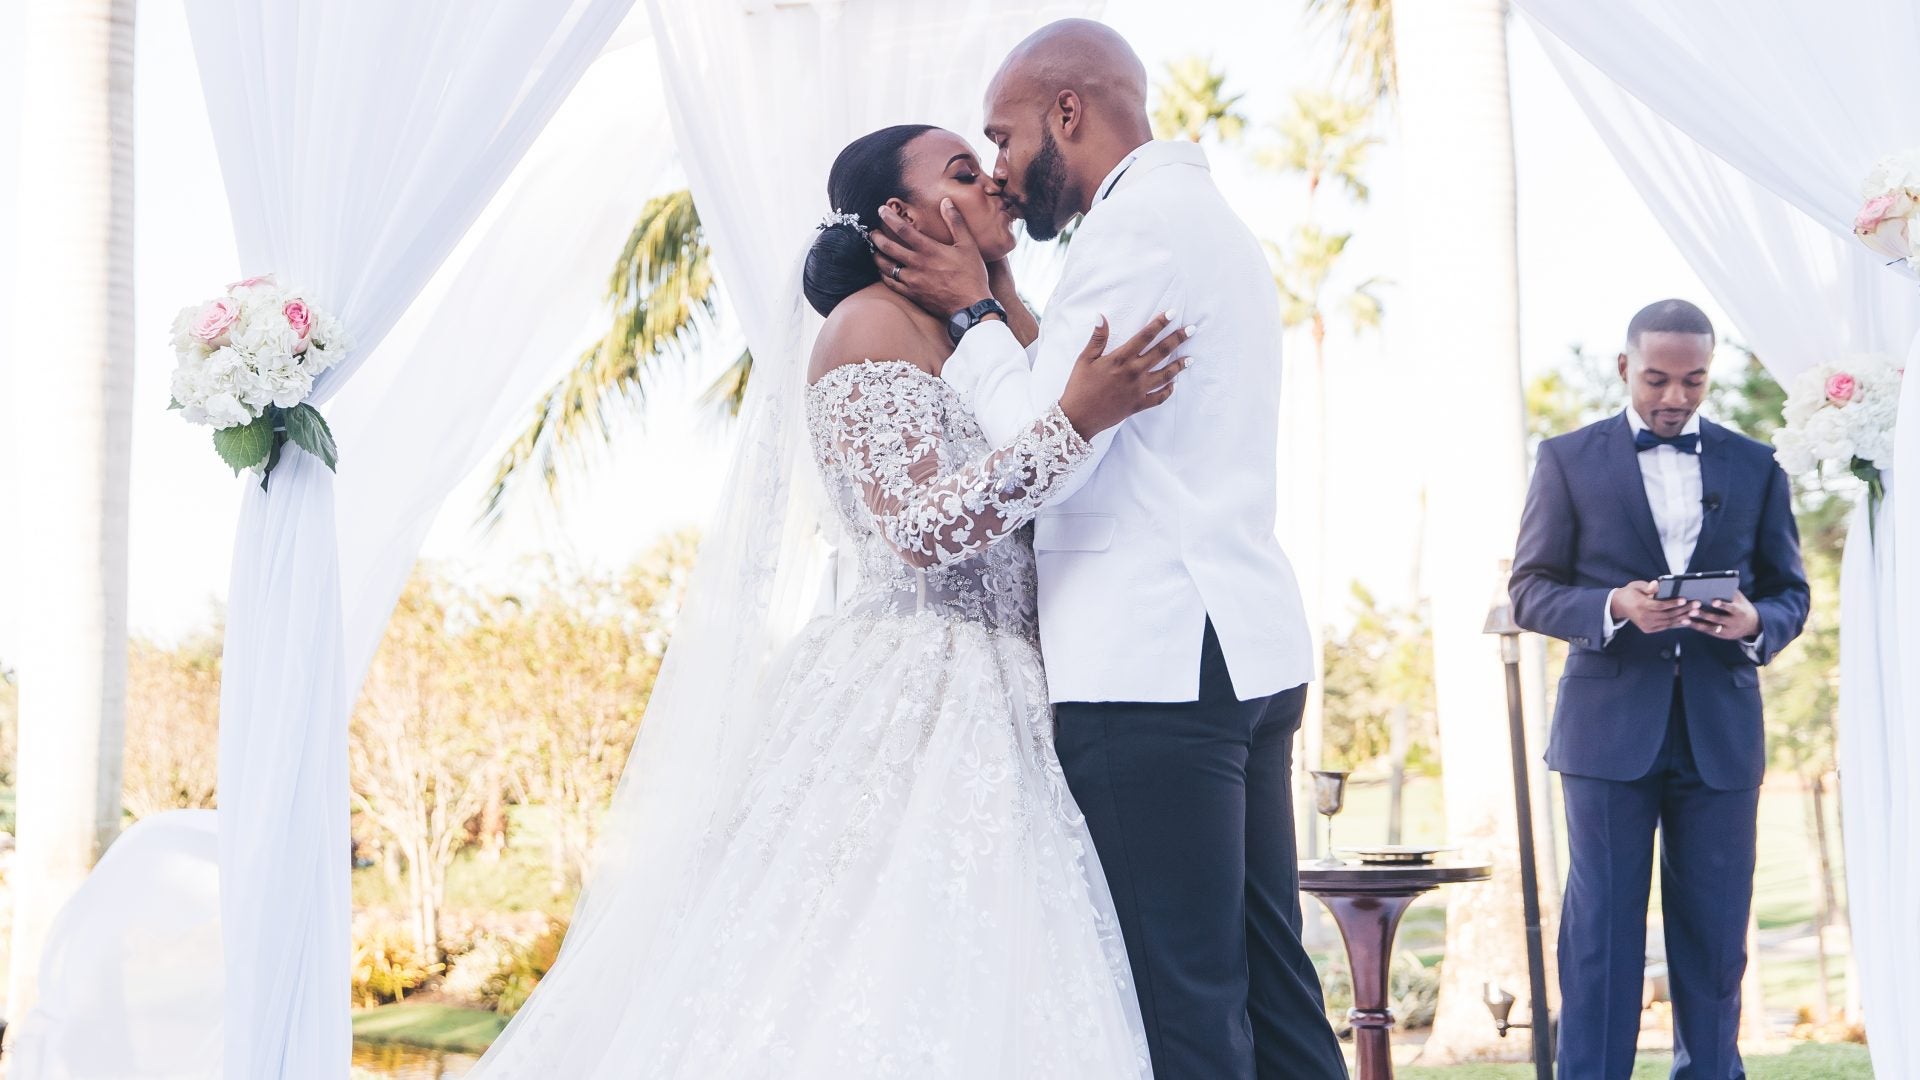 2019 Bridal Bliss Awards! These Couples Wowed Us In Every Way